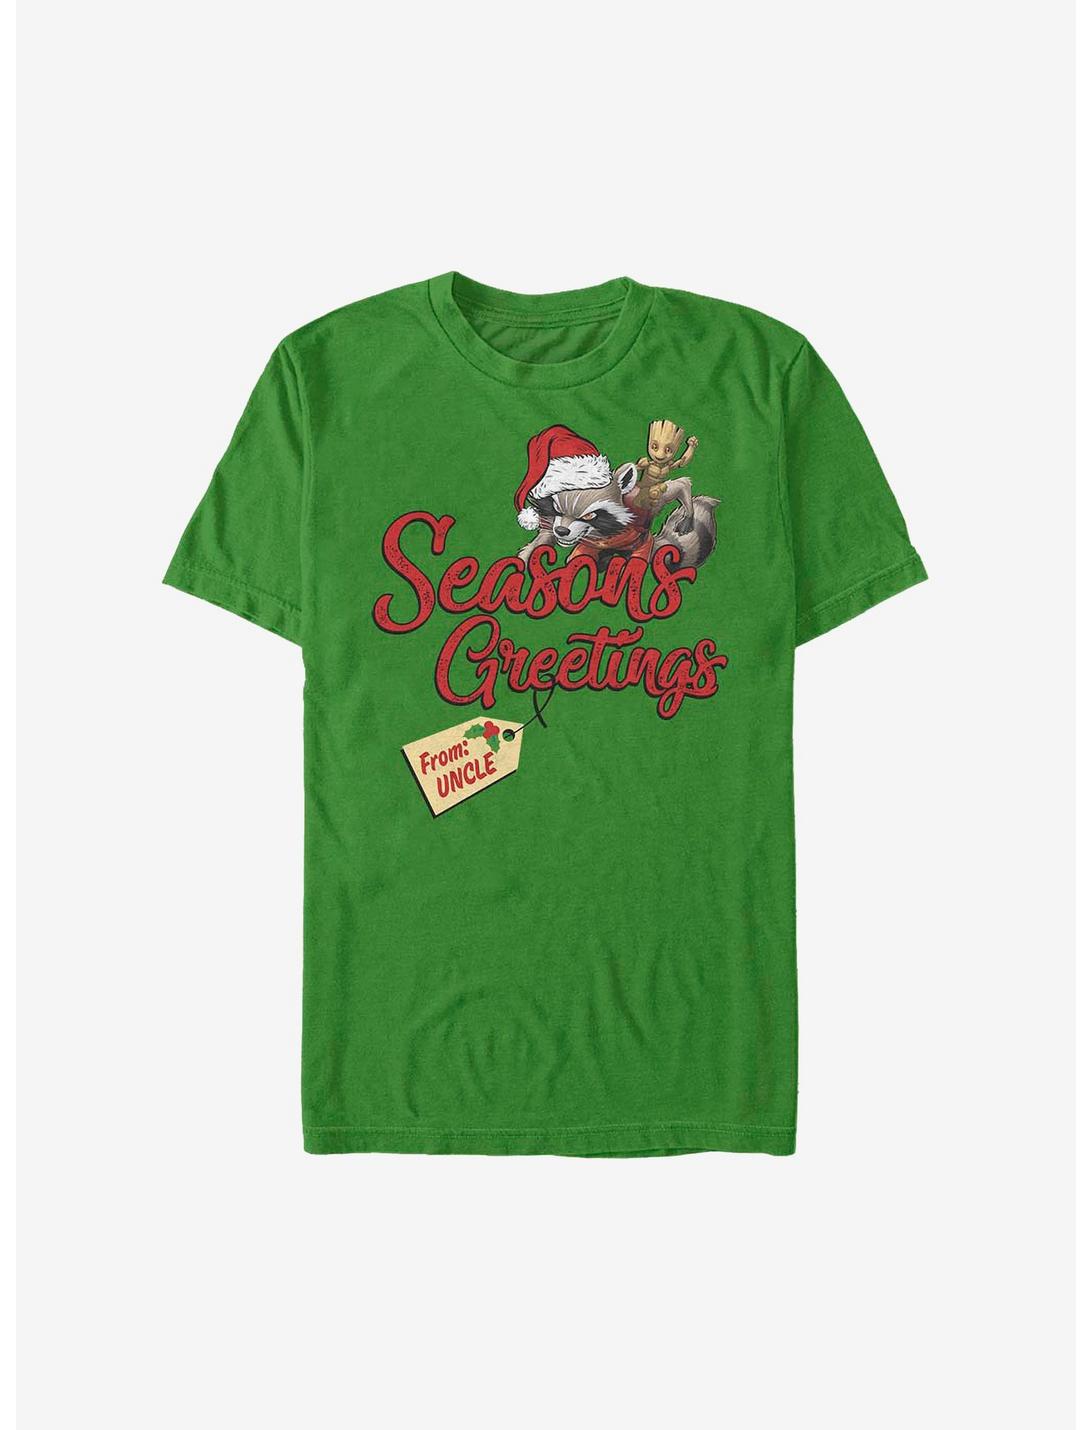 Marvel Guardians Of The Galaxy Seasons Greetings From Uncle Holiday T-Shirt, KELLY, hi-res